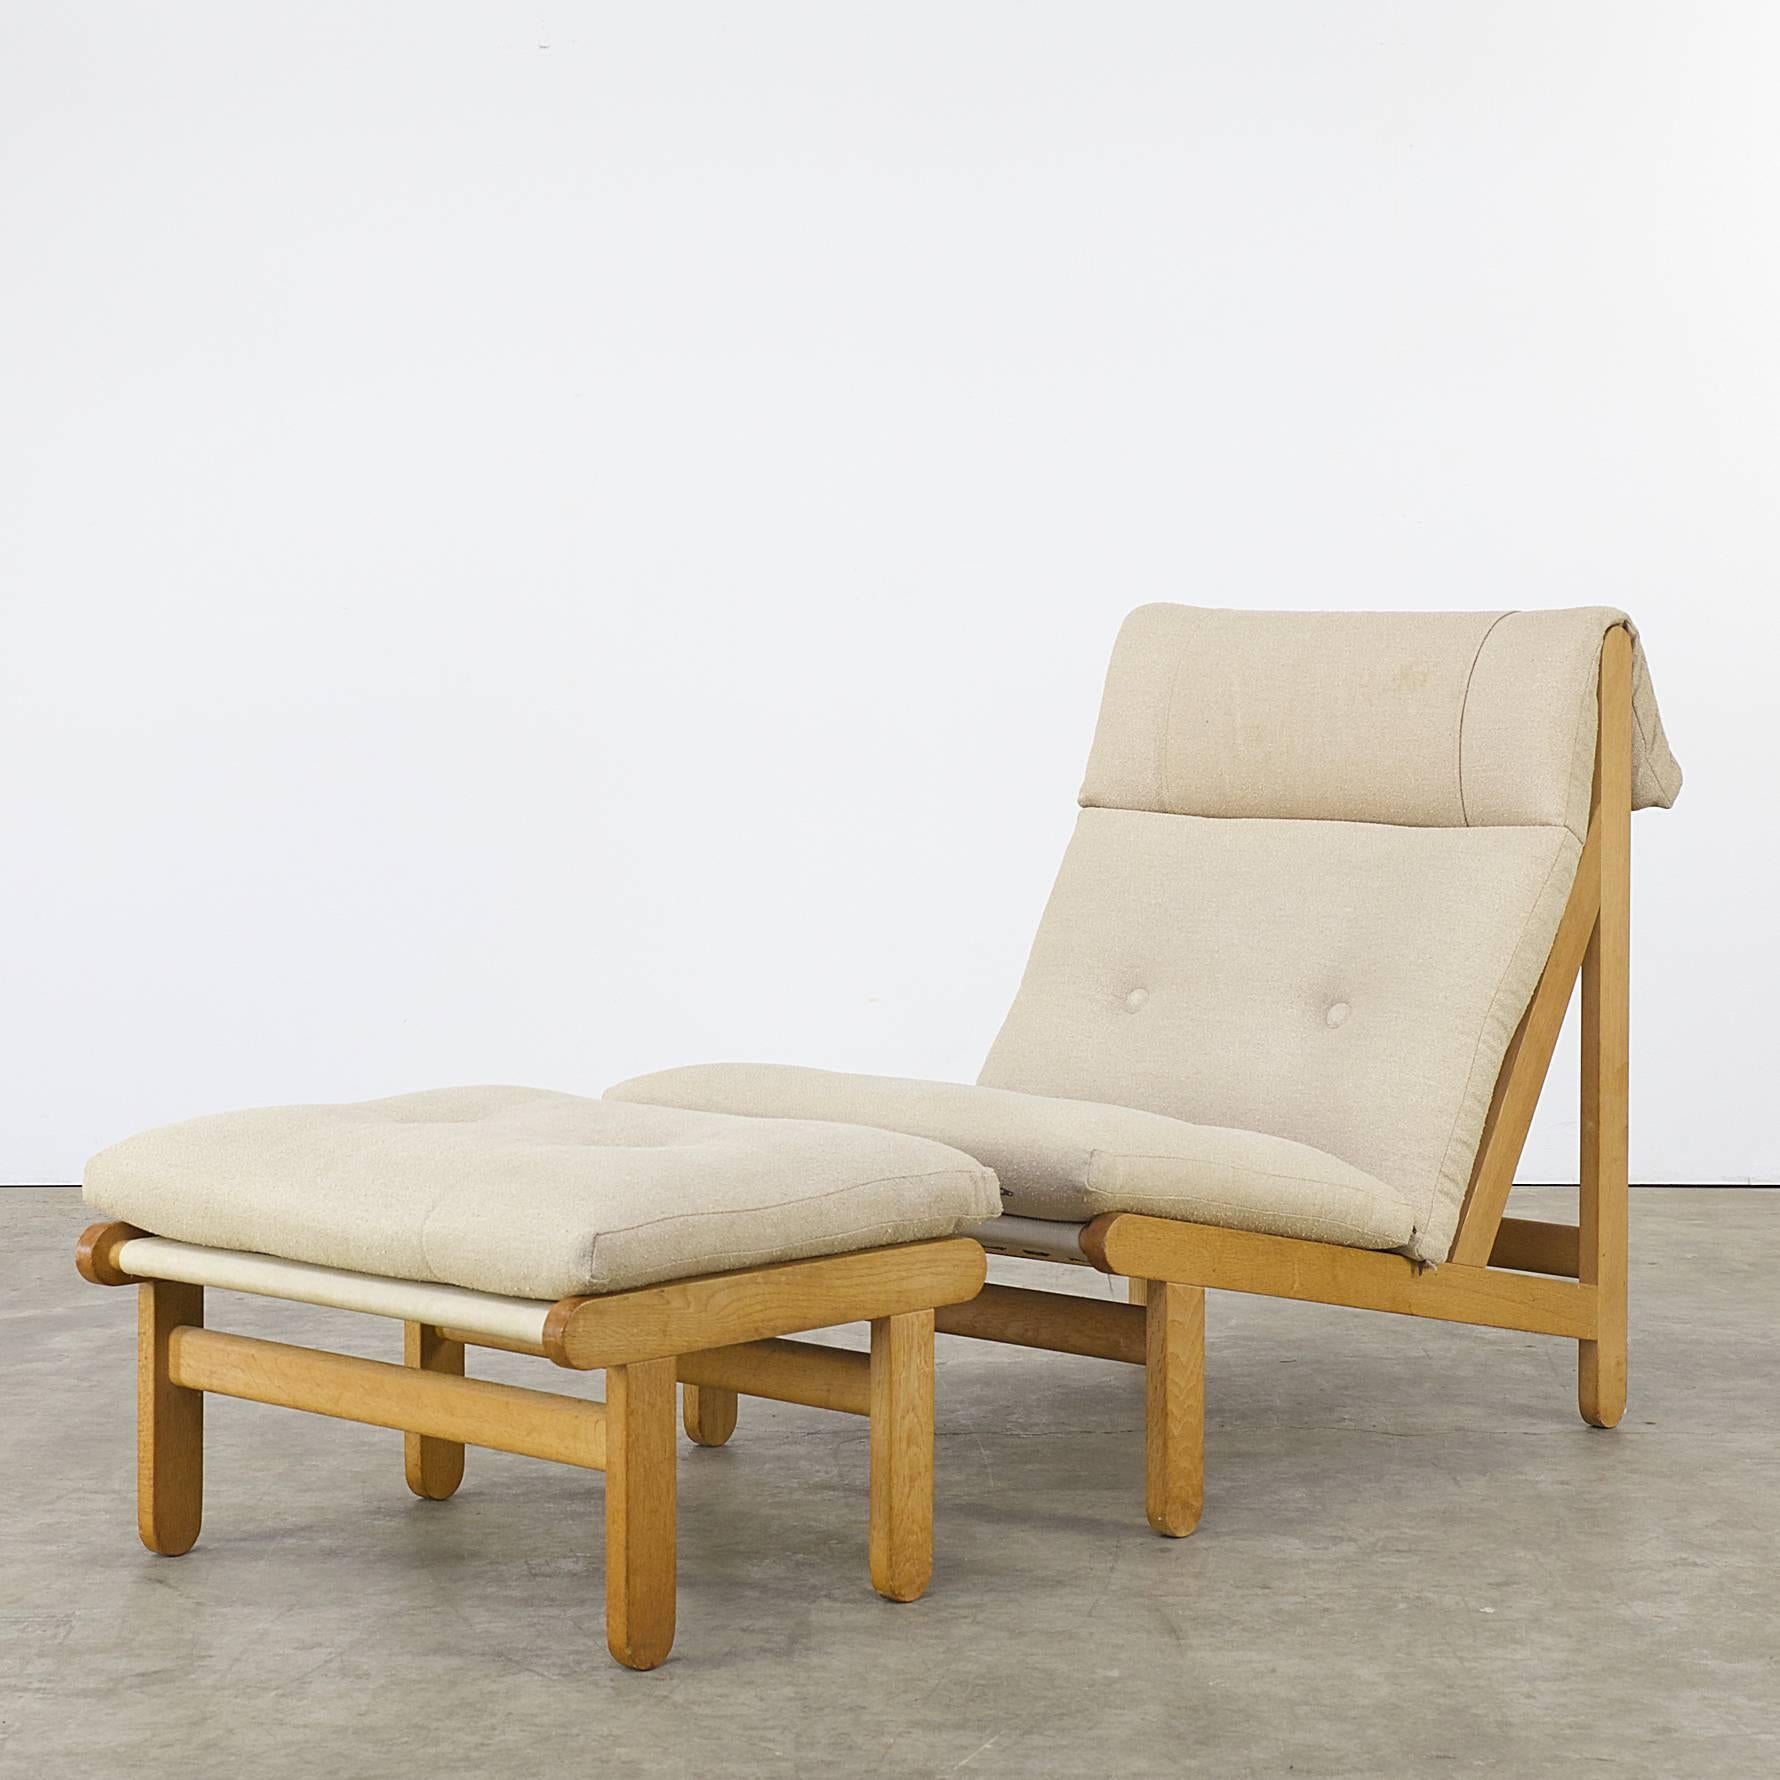 Fabric 1960s Bernt Petersen ‘A Frame’ Fauteuils, Ottoman and Coffee Table for Schiang